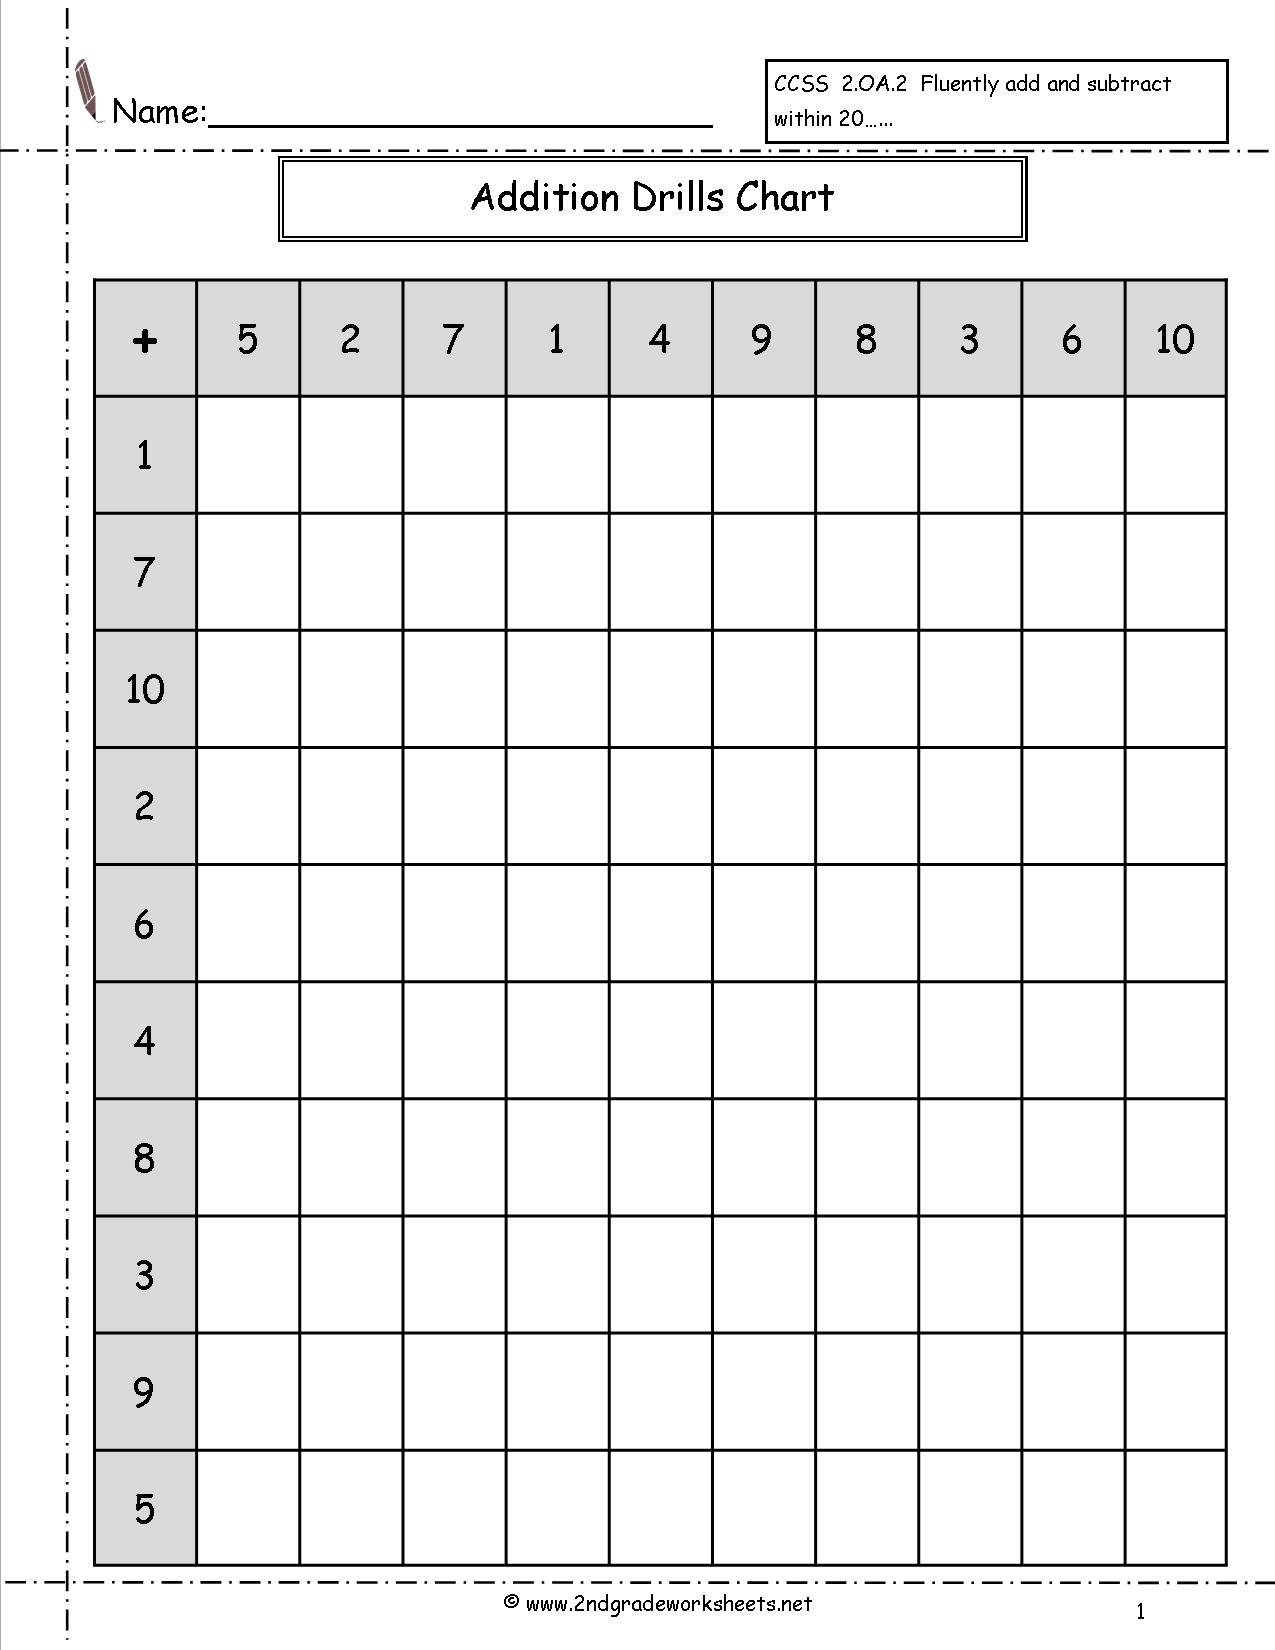 15 Best Images of Single Addition And Subtraction Worksheets - Single